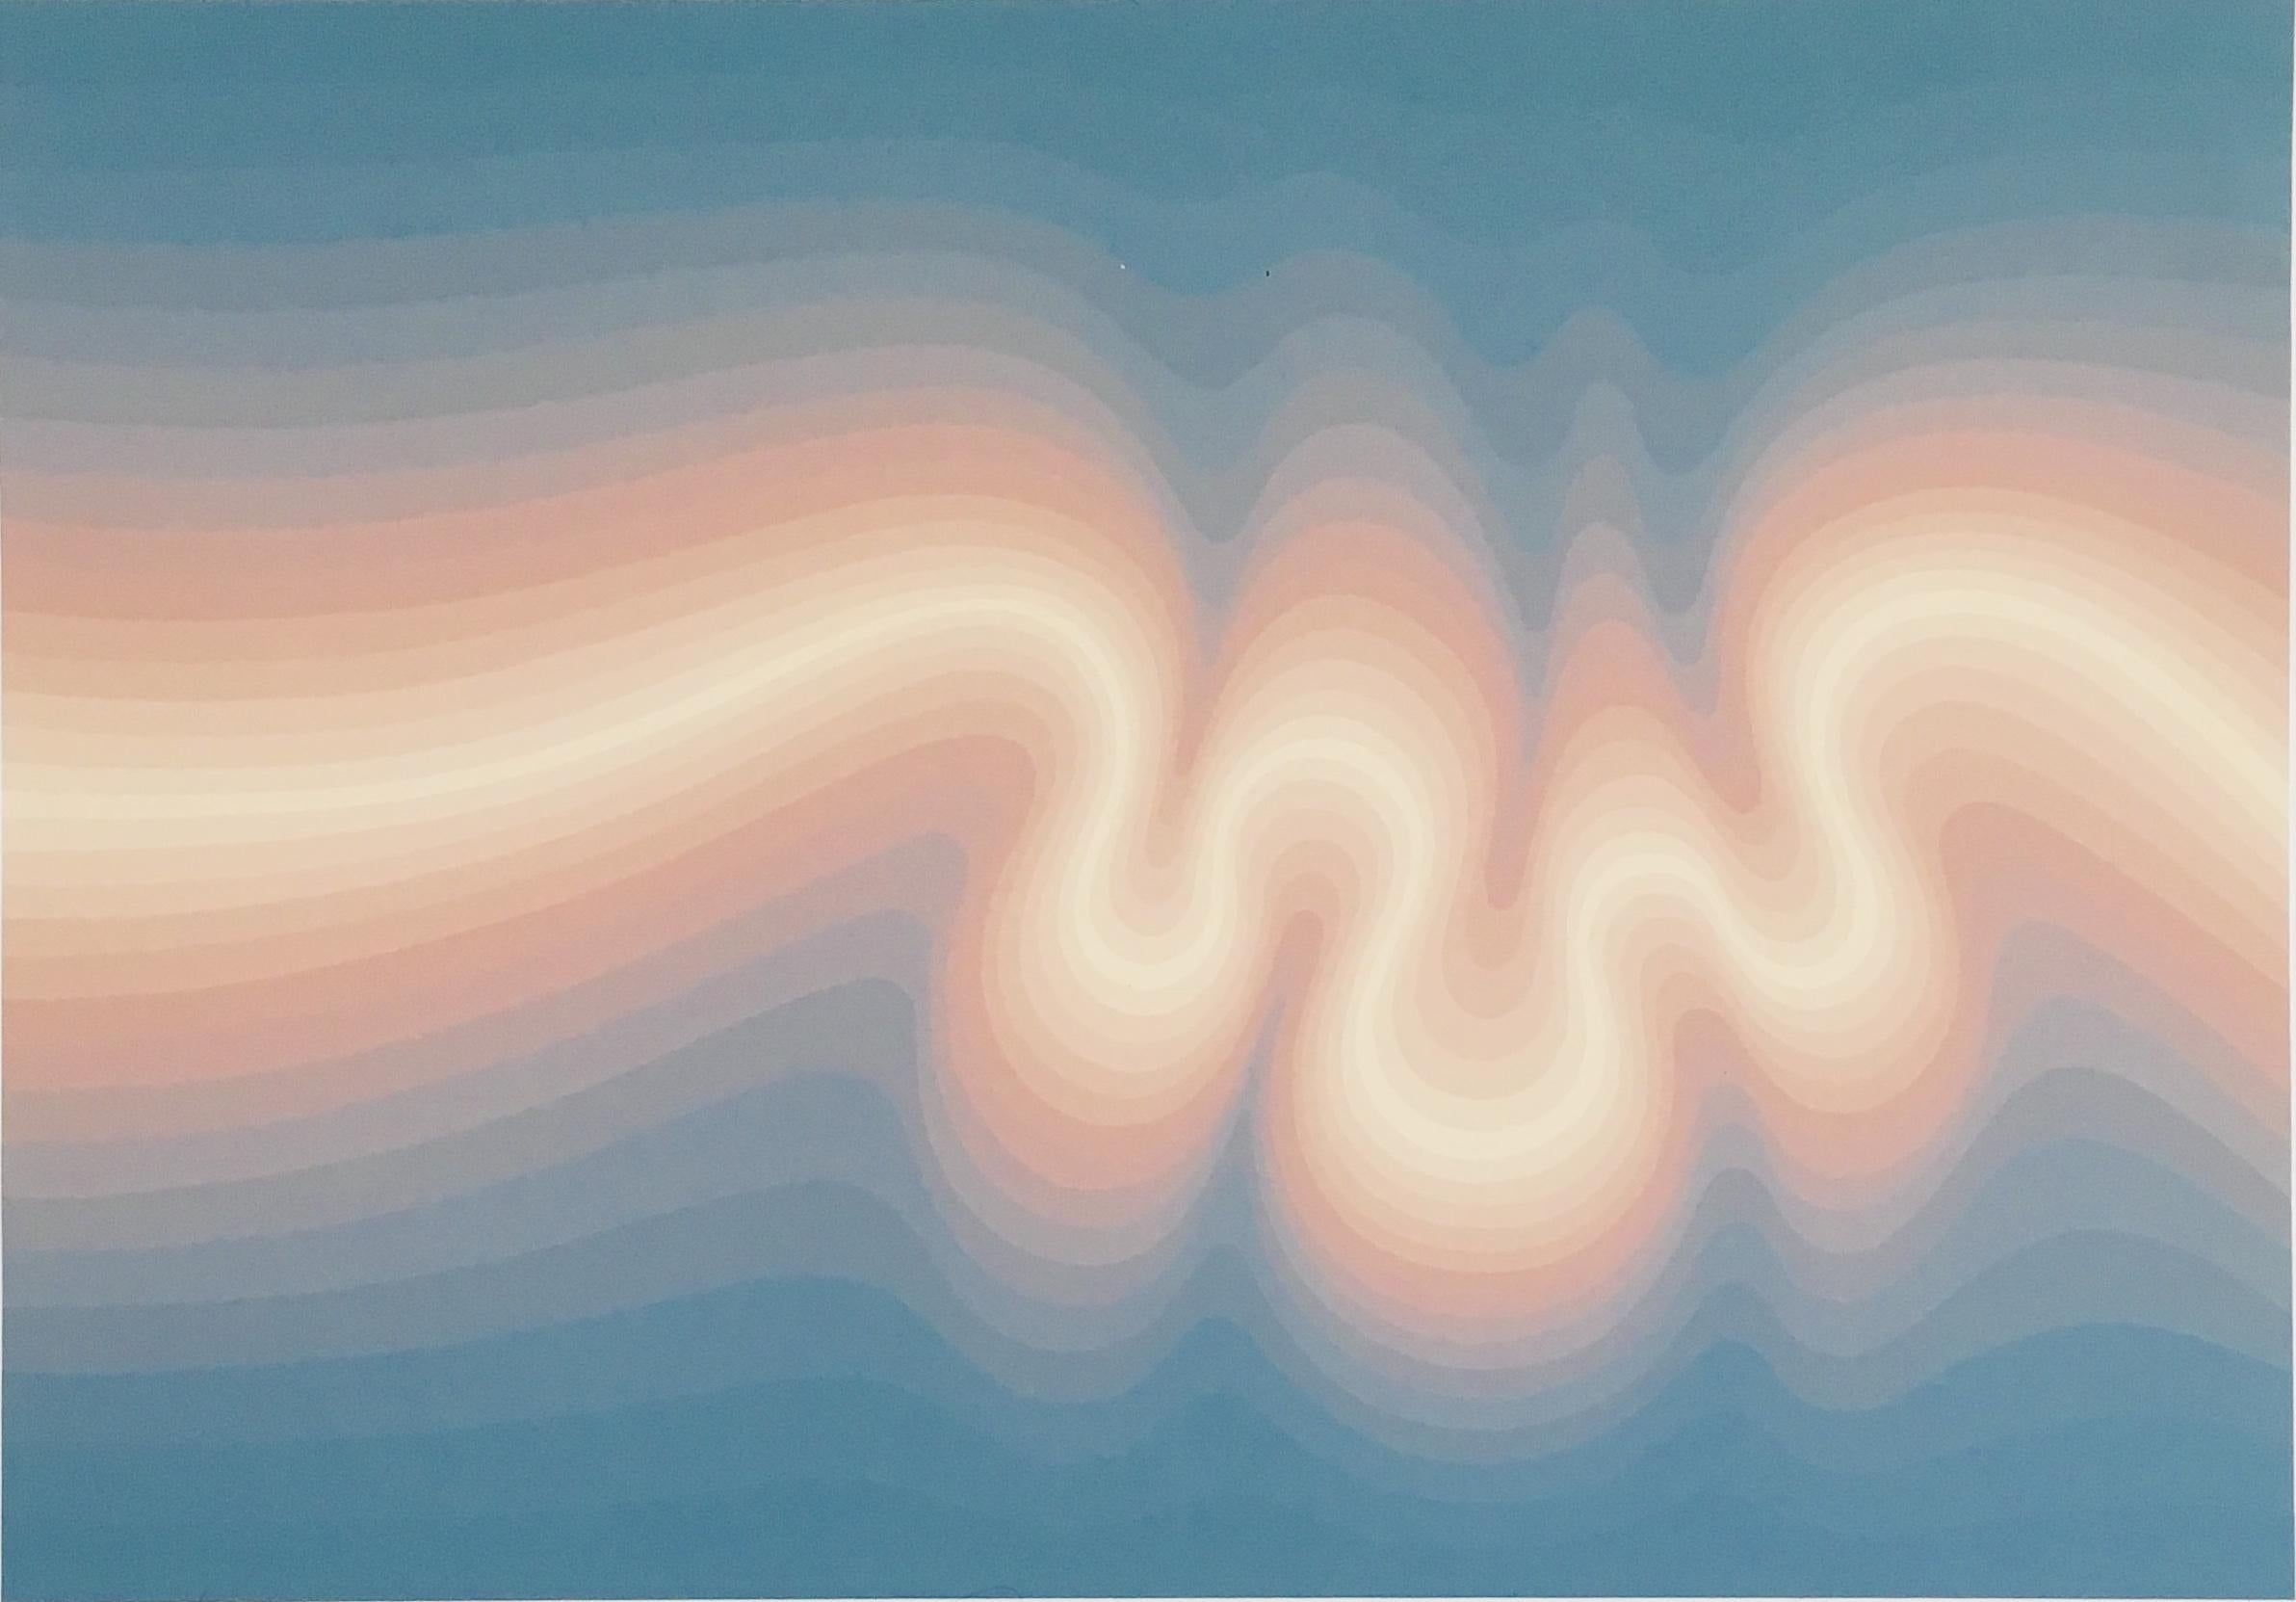 Roy Ahlgren
Polarization, 1981
Serigraph 
Signed, title and edition in pencil in lower margin
Edition 137/150
Sheet: 22 1/4in H x 29 3/4in L (unframed)